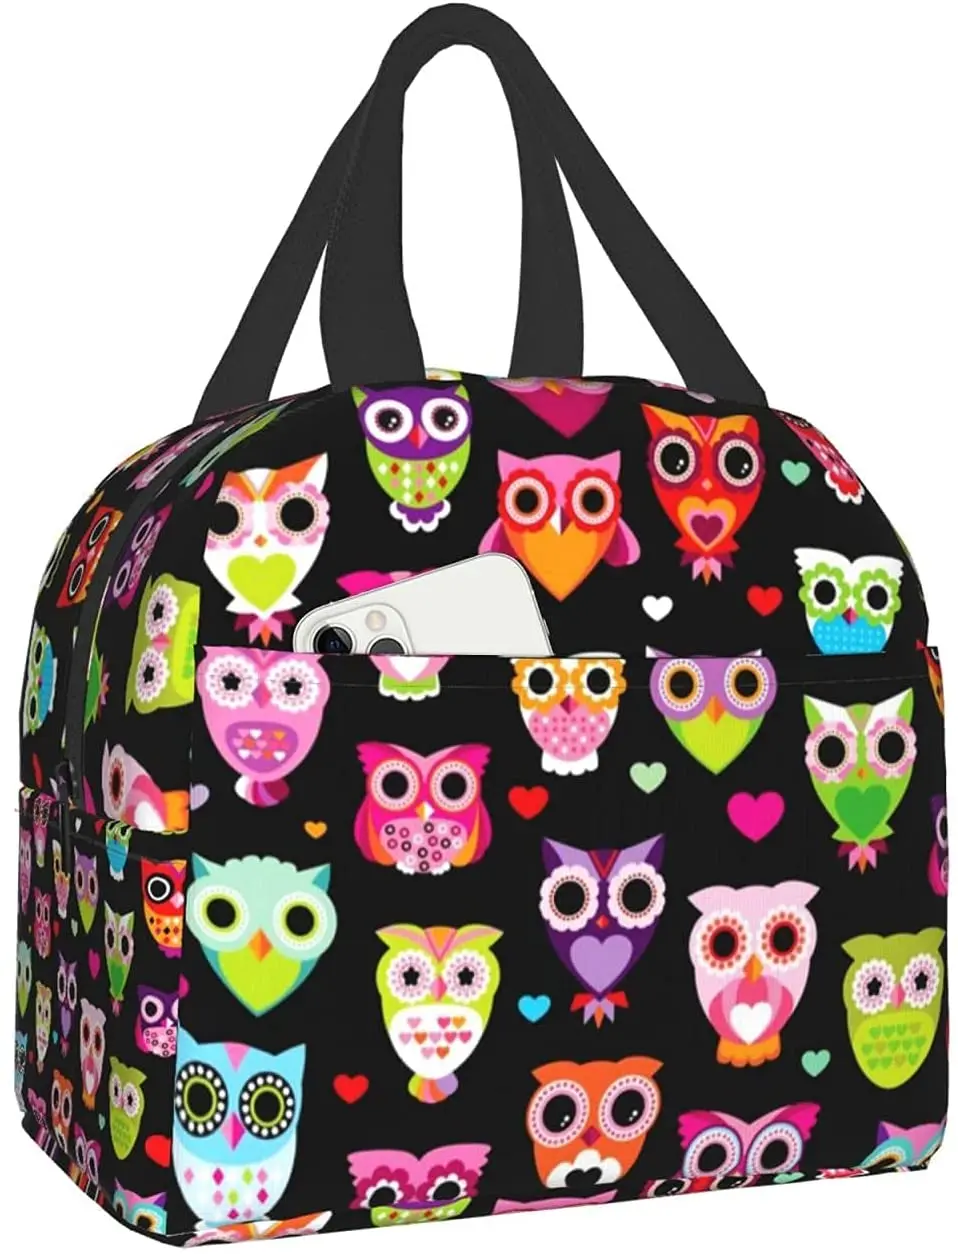 

Cartoon Owls Lunch Bag Insulated Cooler Bento Tote Bags Box Reusable Meal Container for Women Office Picnic Work Beach